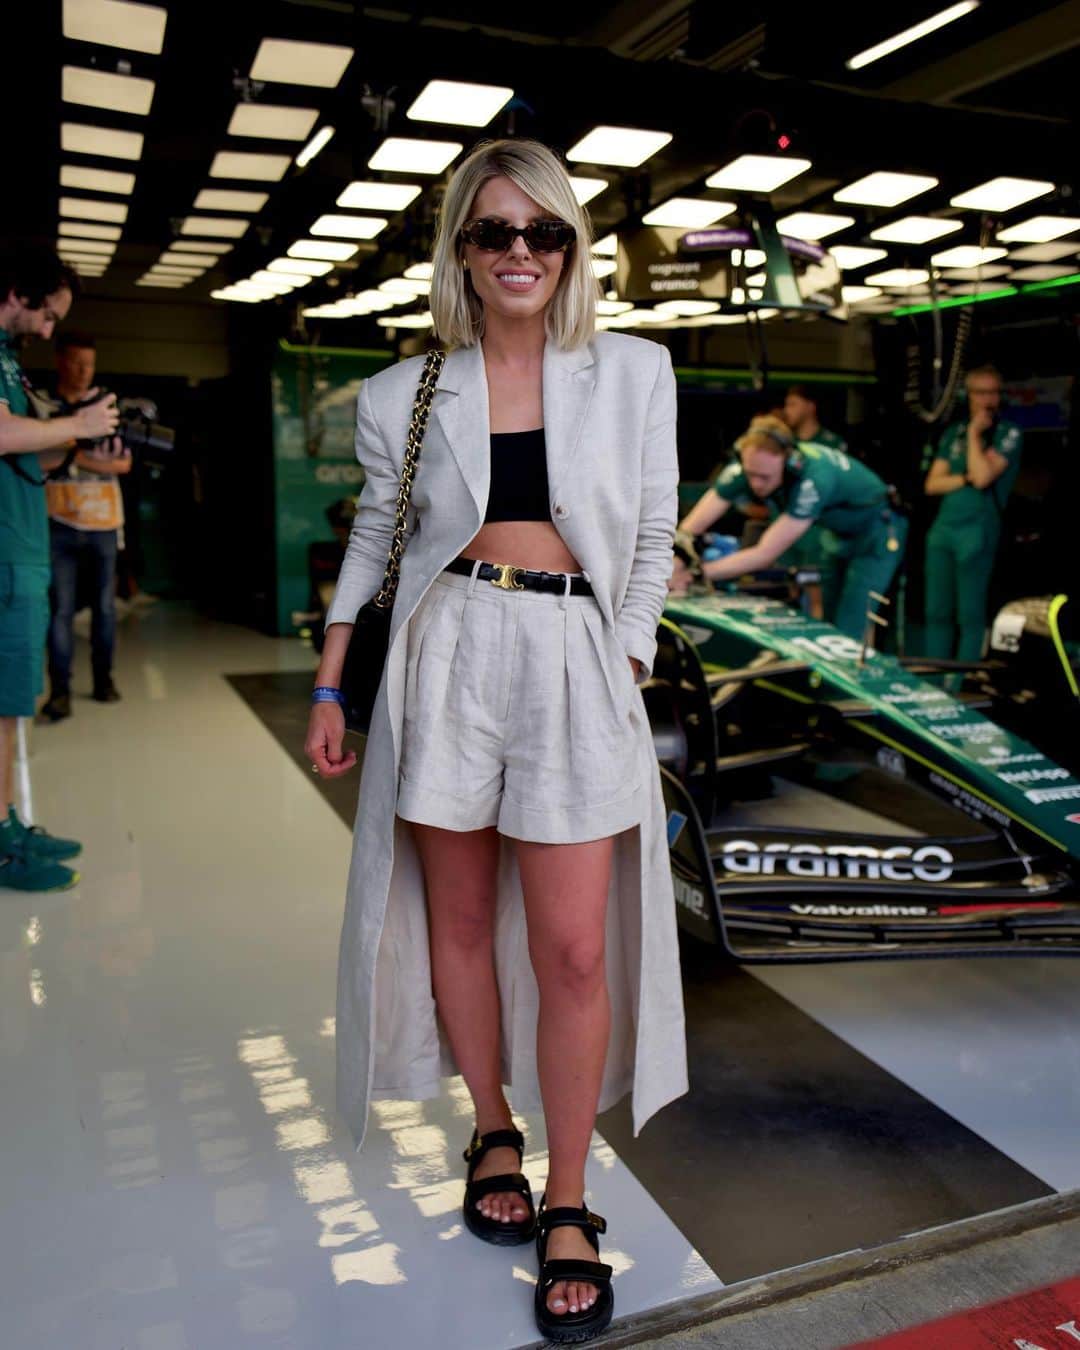 Mollie Kingのインスタグラム：「What a dream day!  Ever since I started watching Drive To Survive a few years ago I’ve been hooked on Formula 1. Ad - Thank you so much @peroniuk 0.0 and @astonmartinf1 for the invite, it’s a day I’ll never forget!   #Formula1 #astonmartin #silverstone #drinkresponsibly bedrinkaware.co.uk」